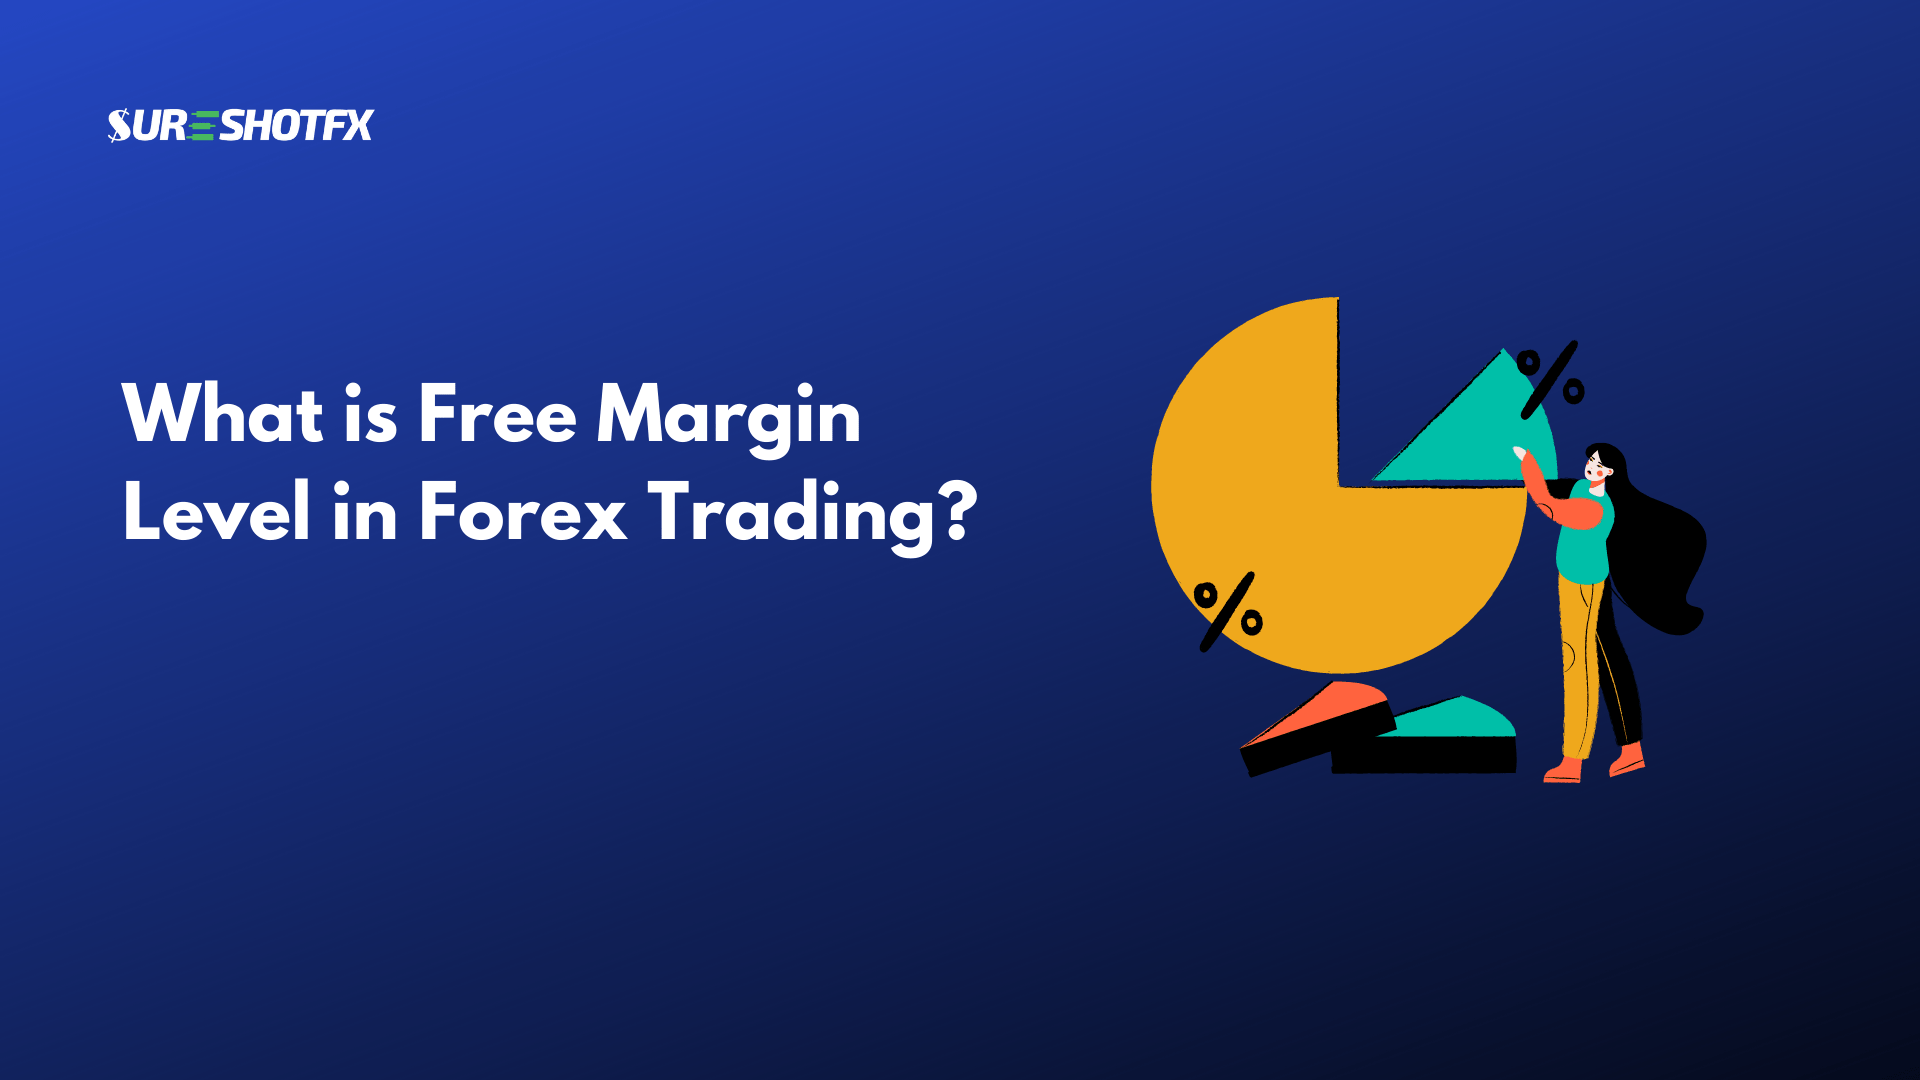 What is free margin level in forex trading?